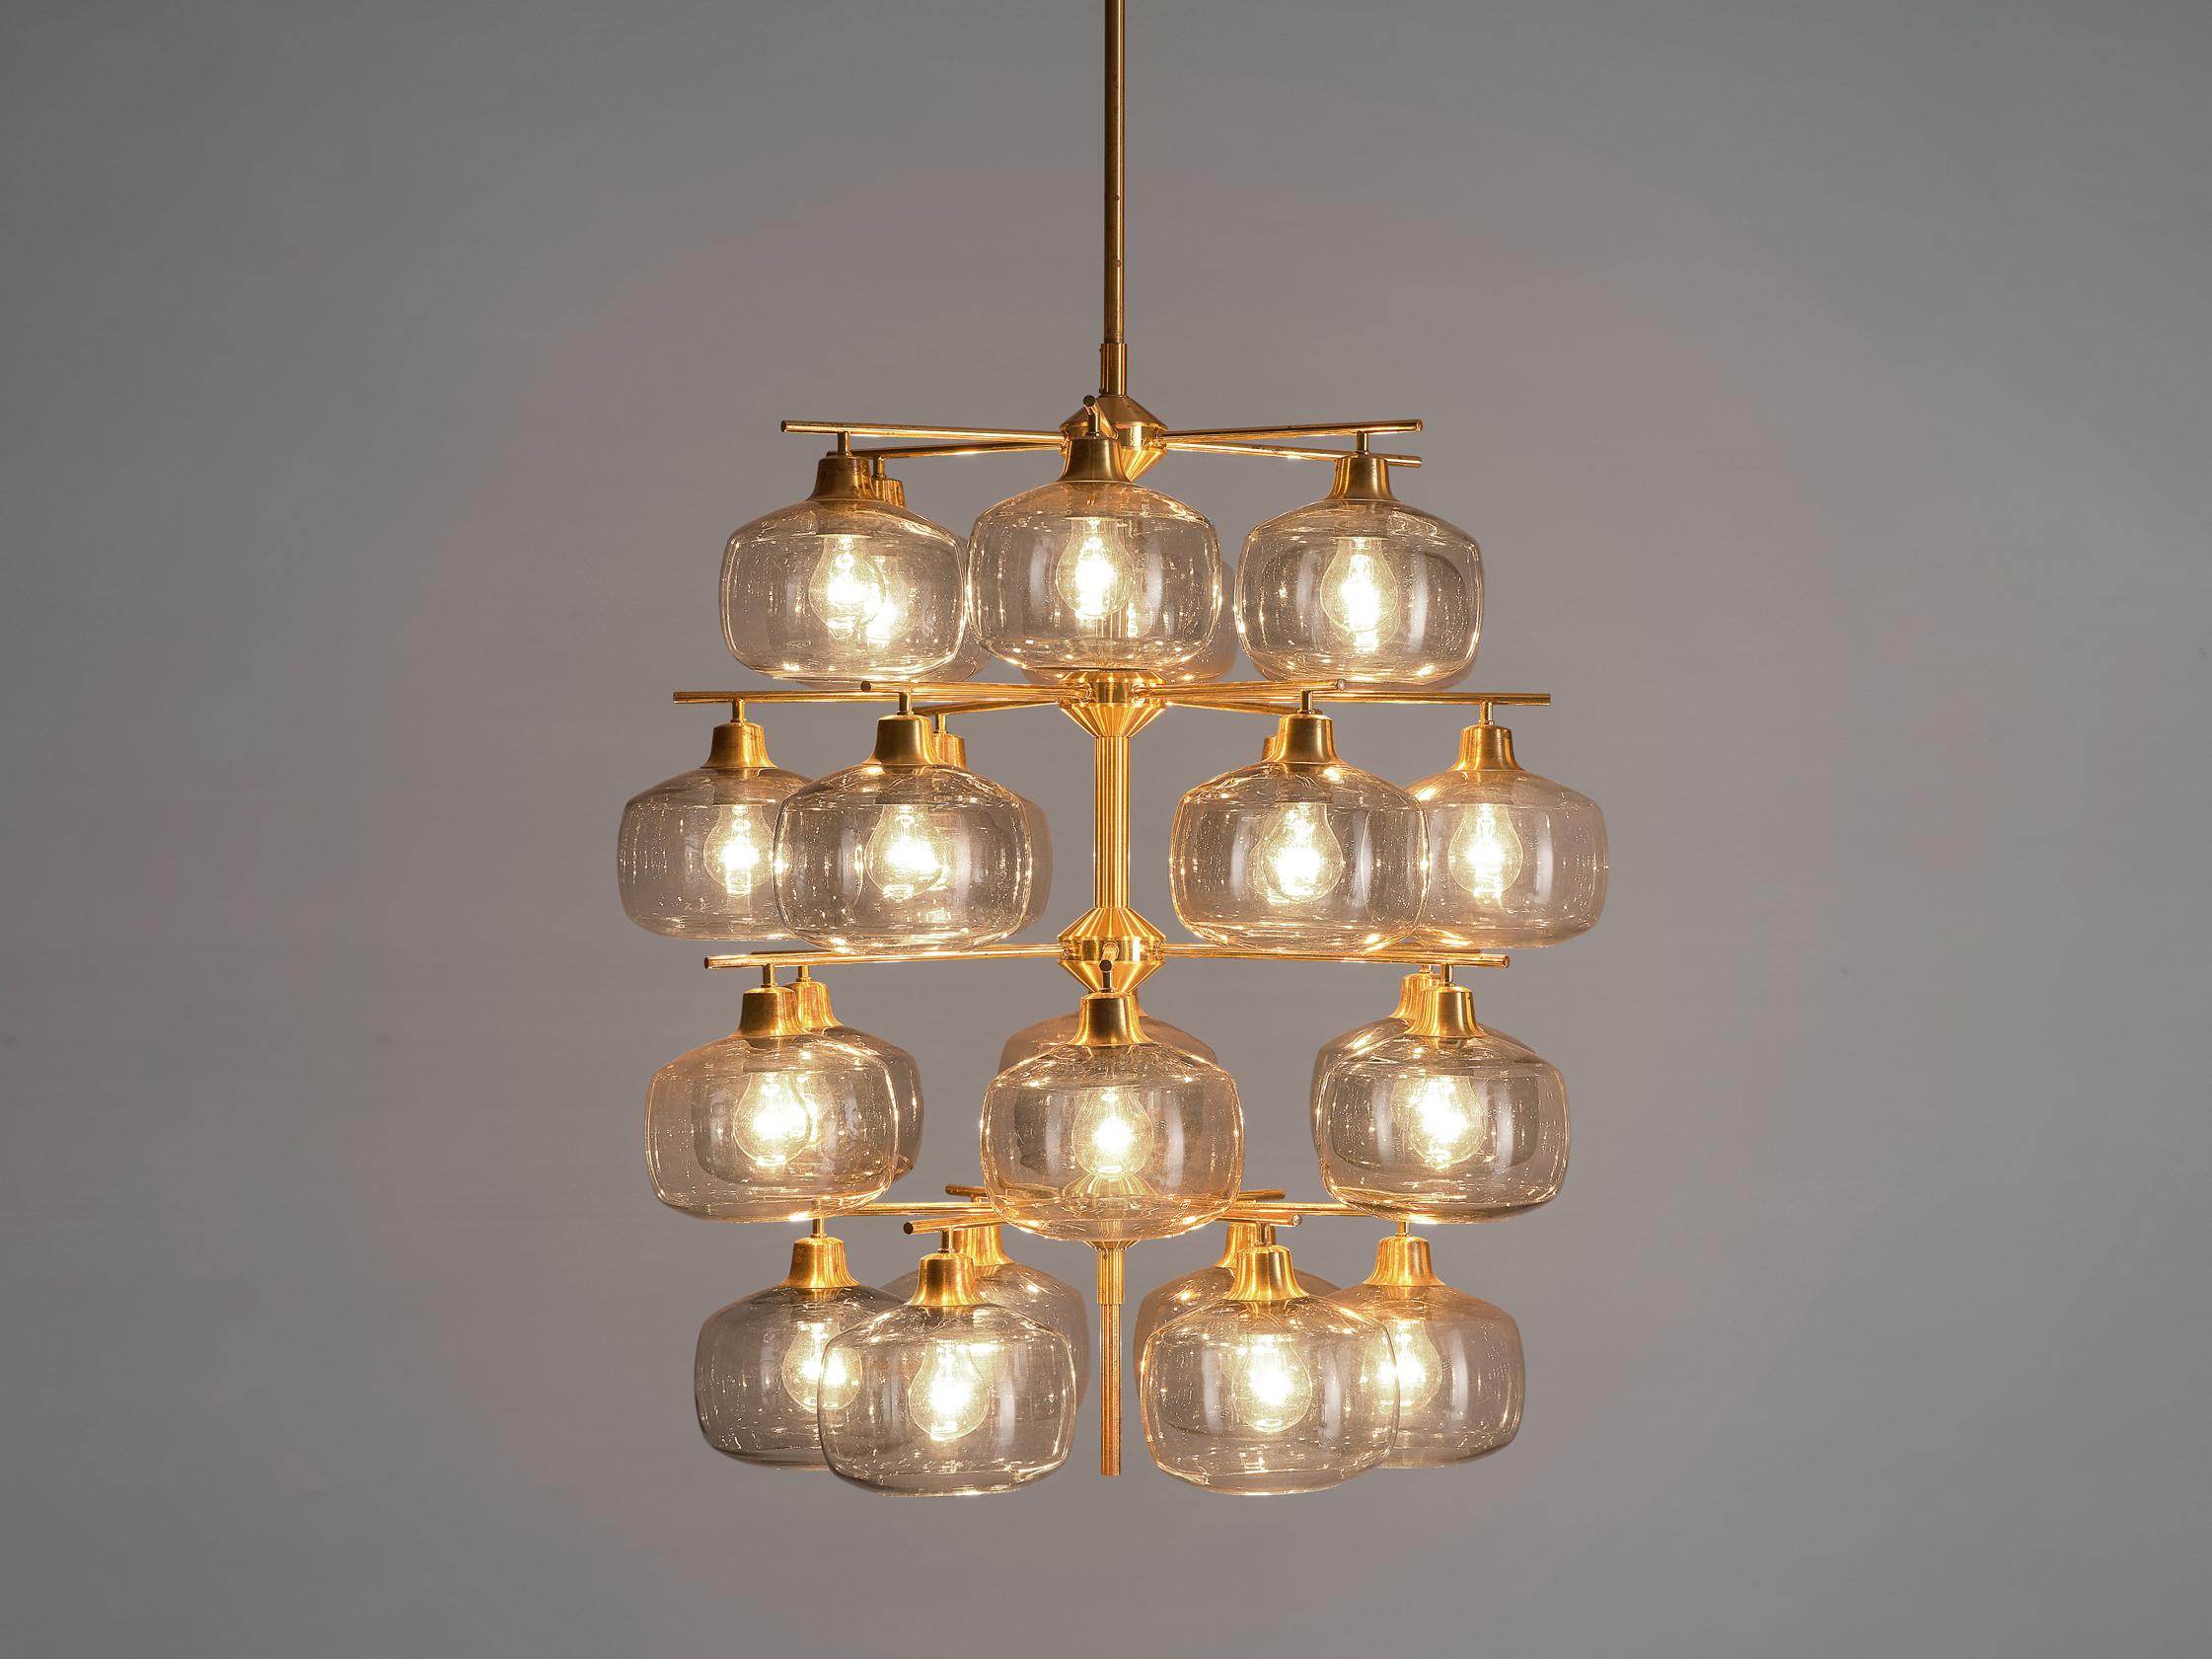 Brass Pair of Swedish Chandeliers by Holger Johansson, 1952